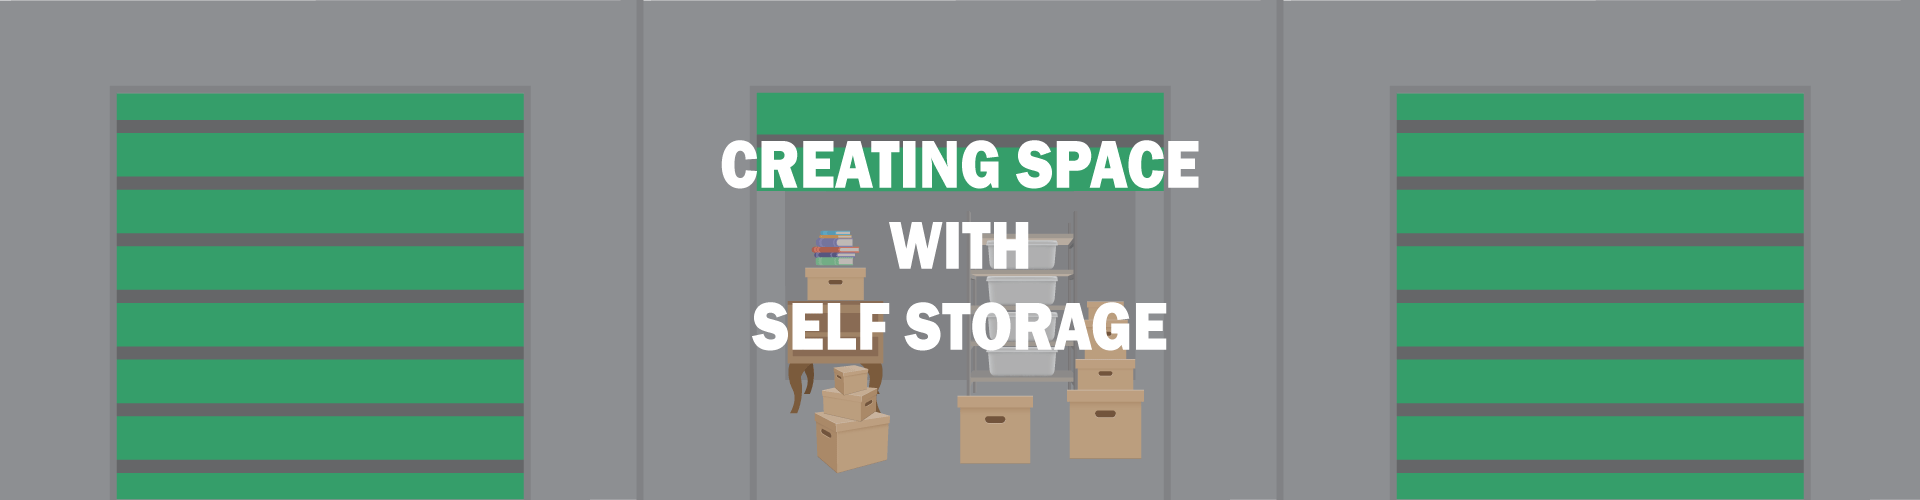 hero image for Creating Space With Self-Storage